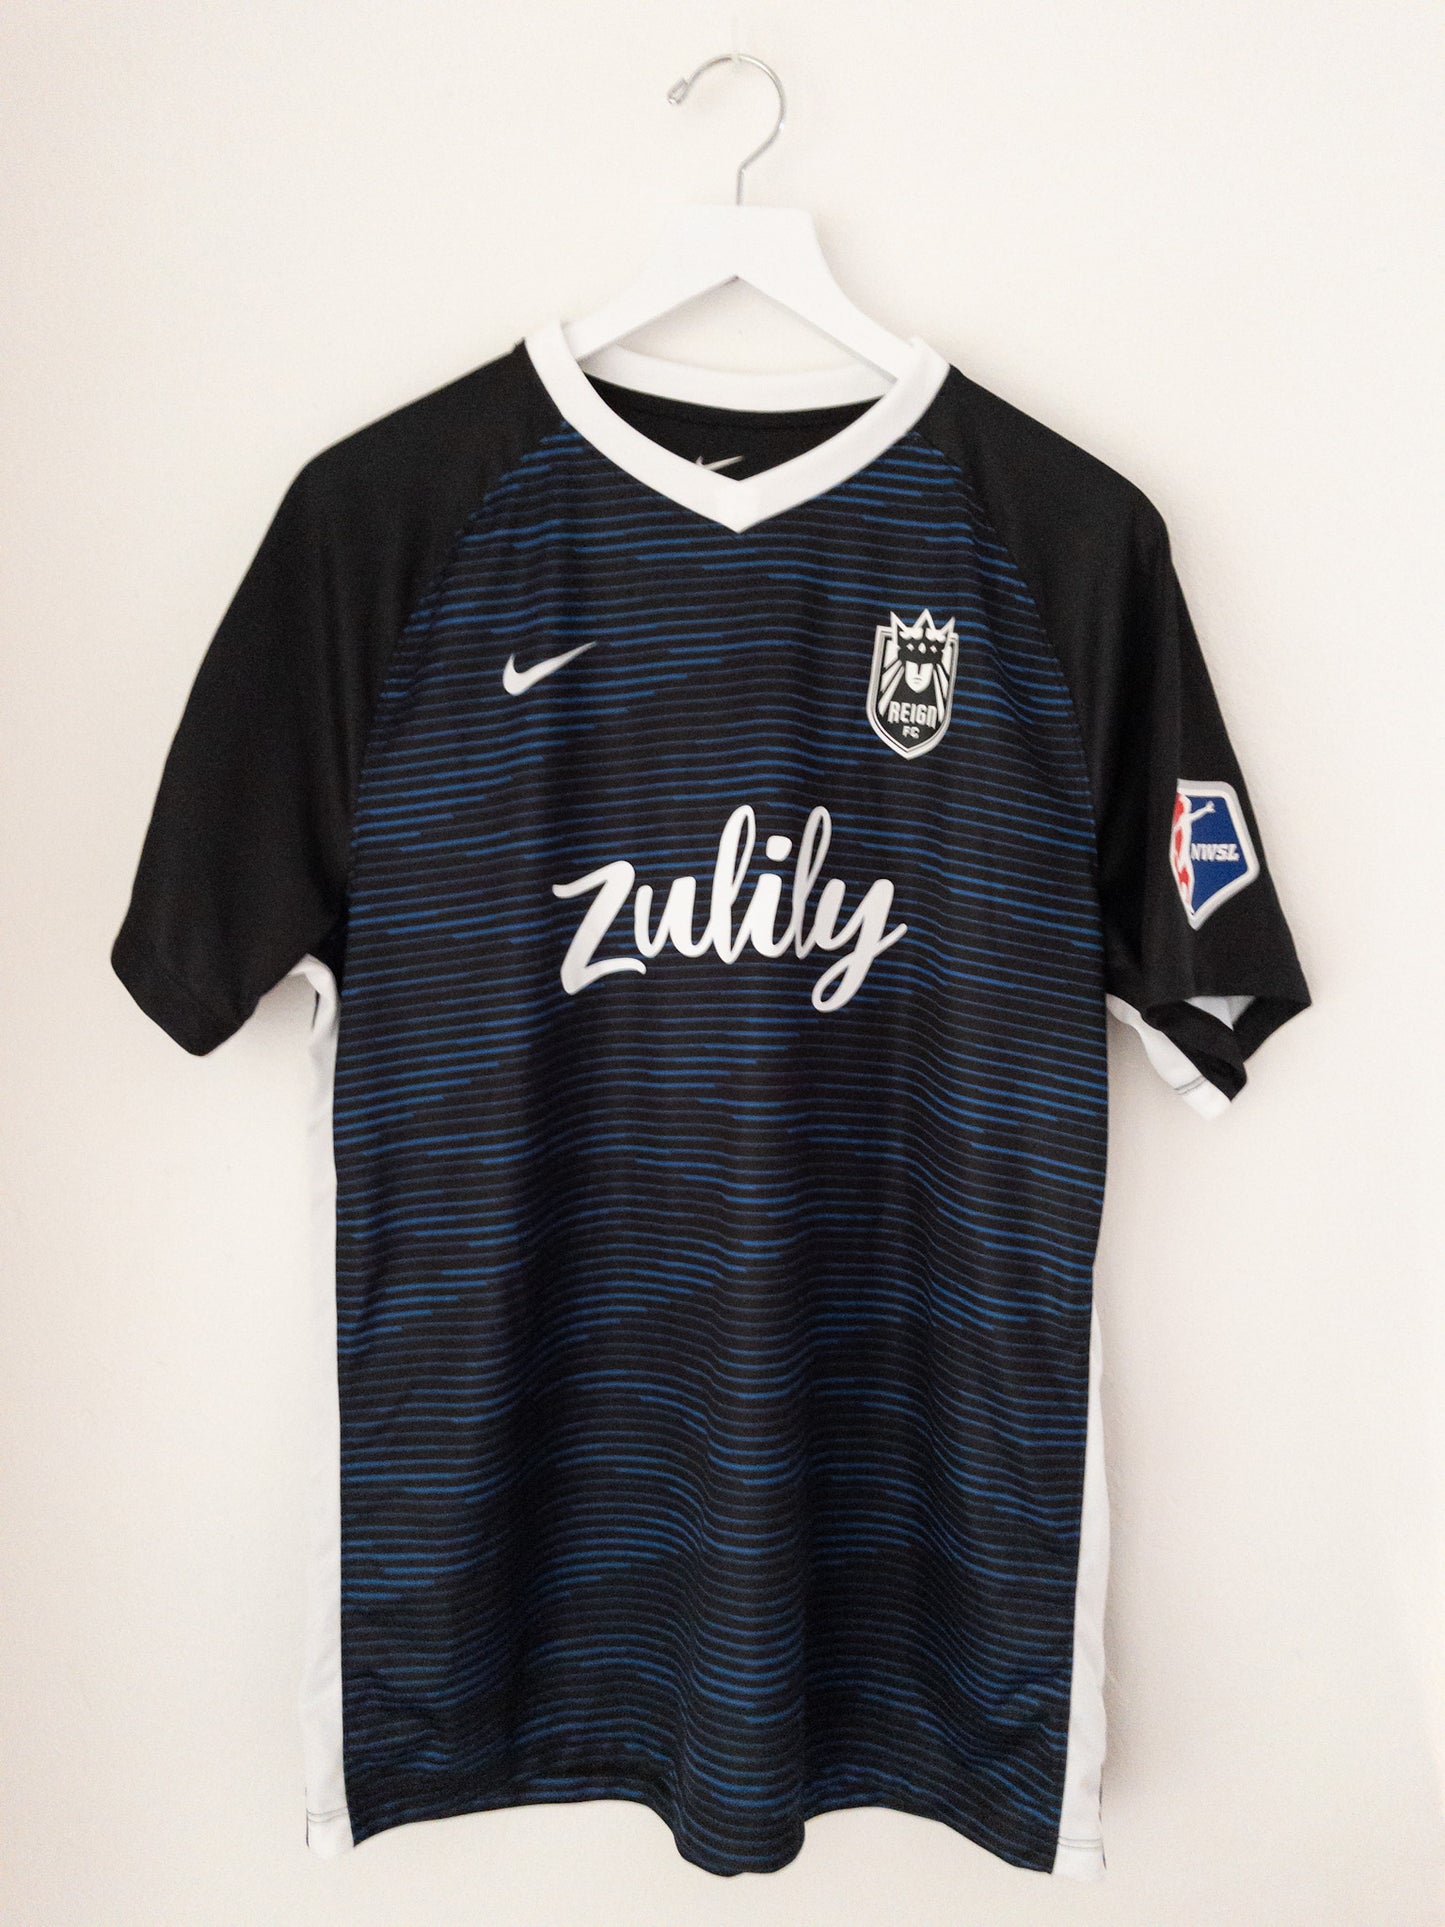 2019 Seattle Reign FC Home